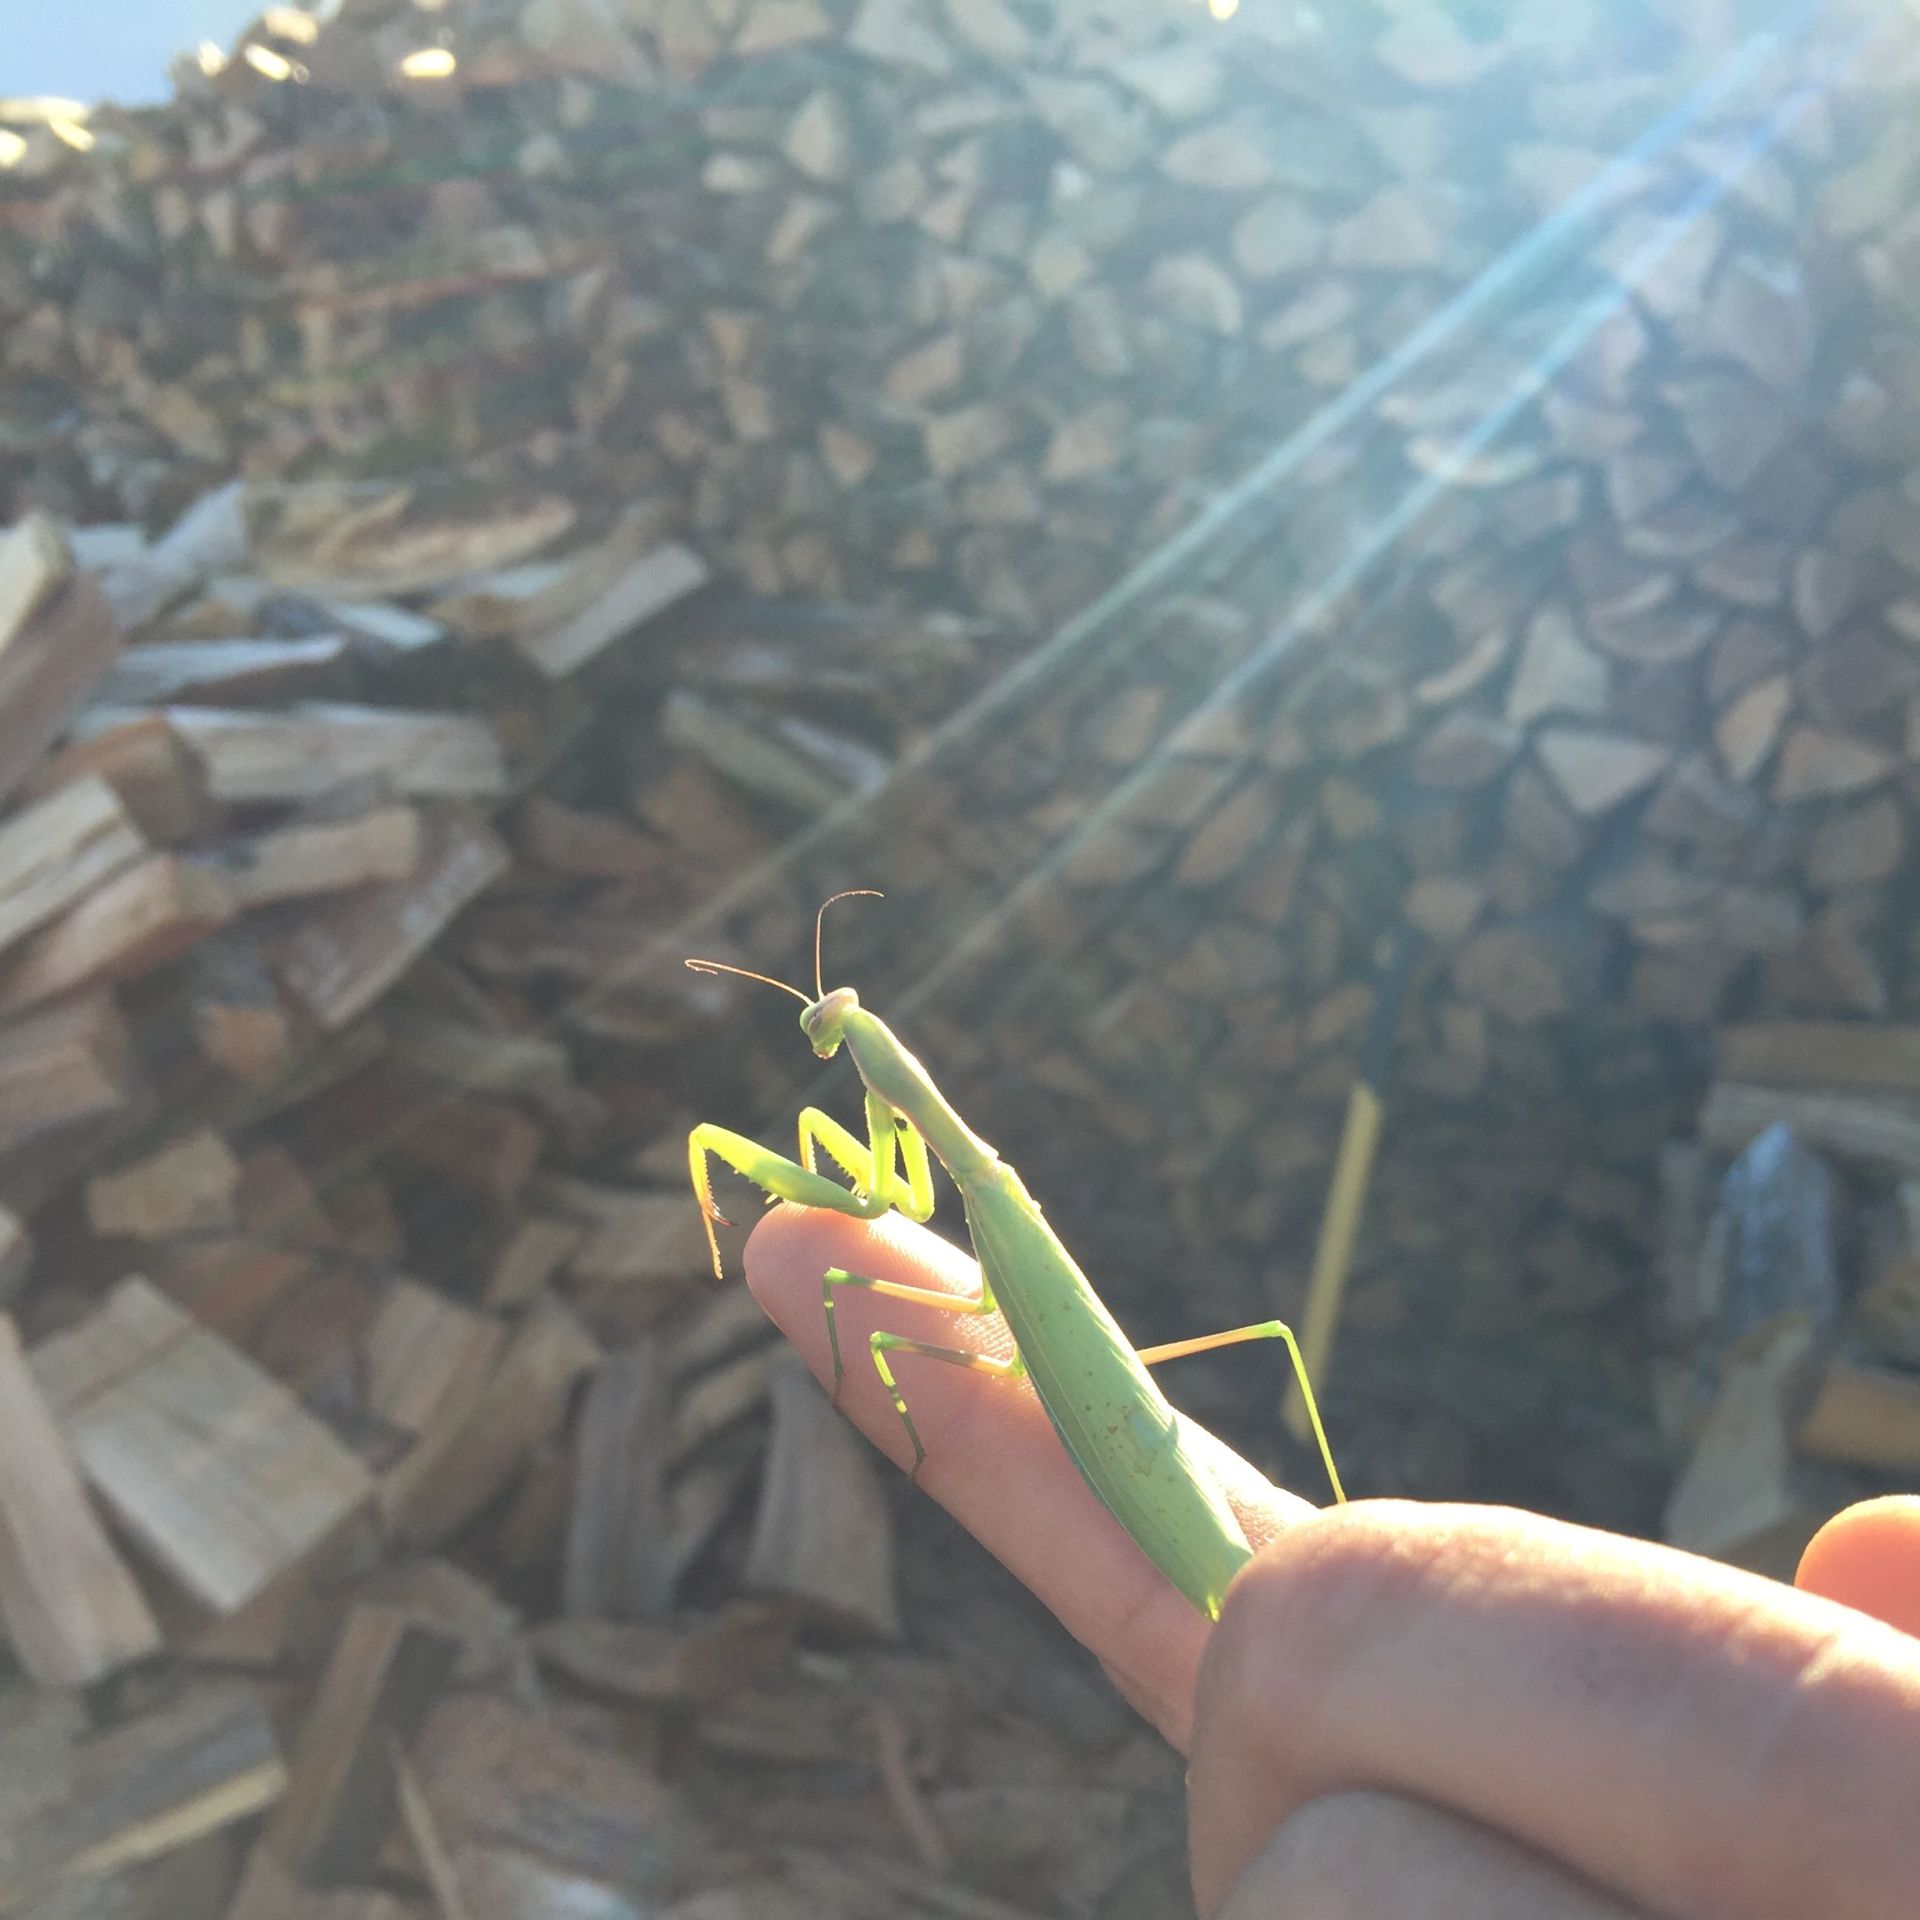 Mantis in front of the firewood